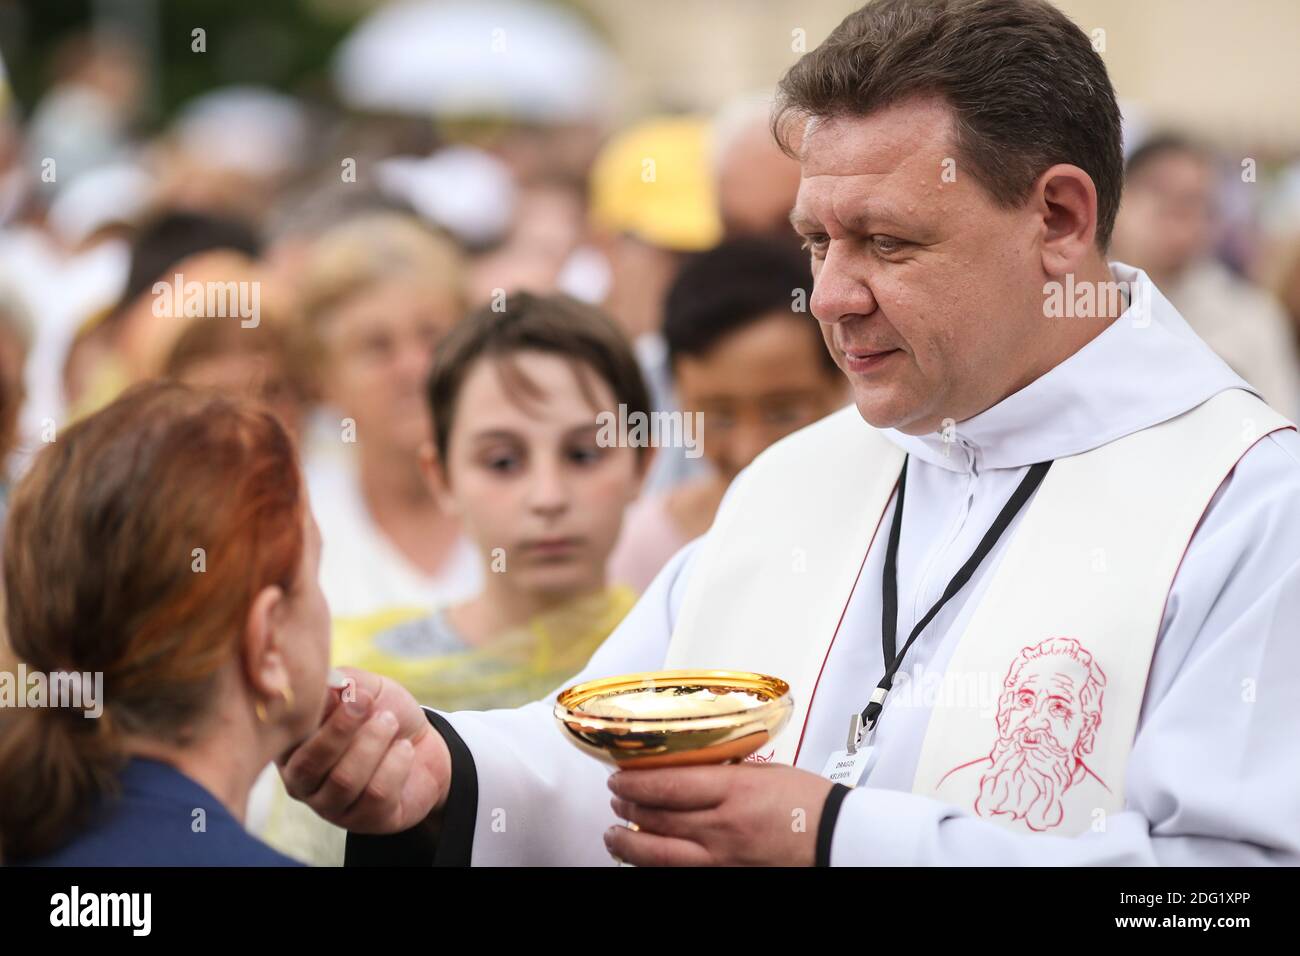 Bucharest, Romania - May 31, 2019: A catholic priest is giving communion to people gathered in a Bucharest square. Stock Photo